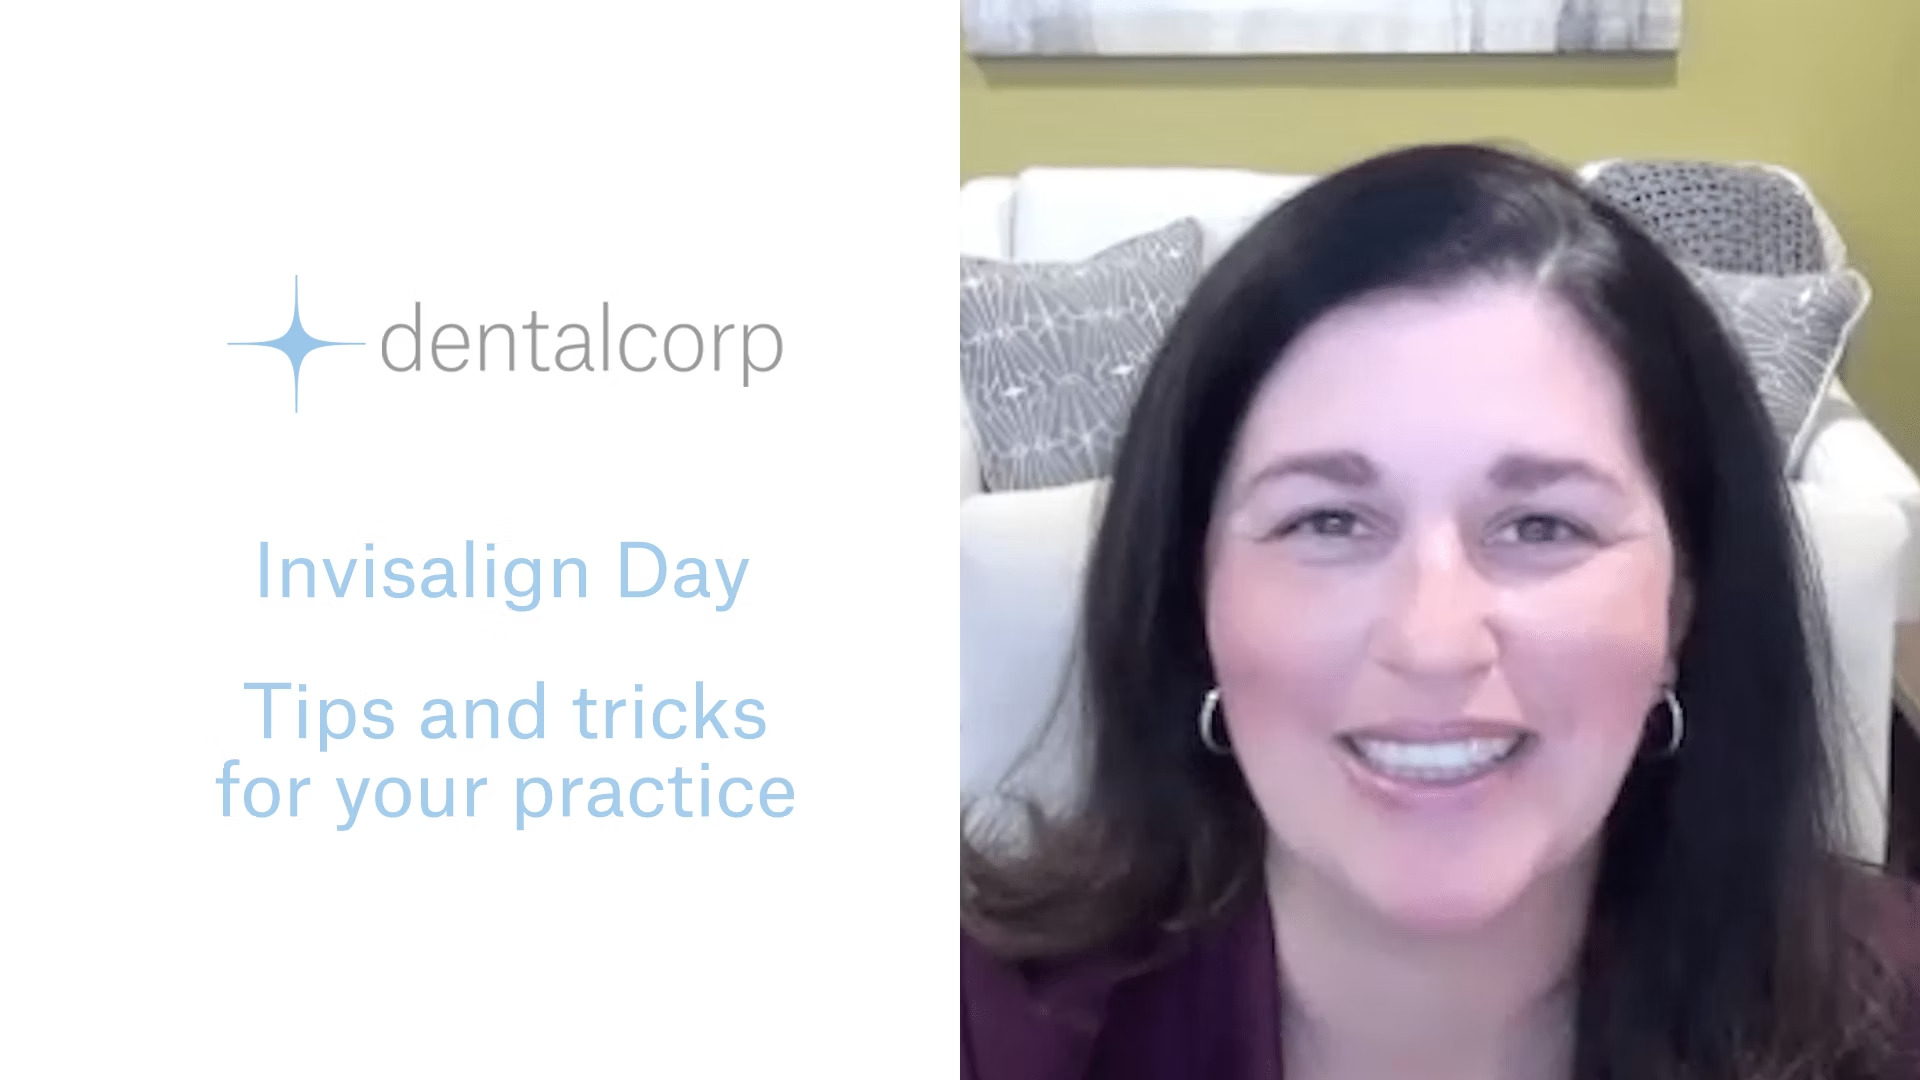 dentalcorp / “Invisalign Day With Dr. Pukanich”